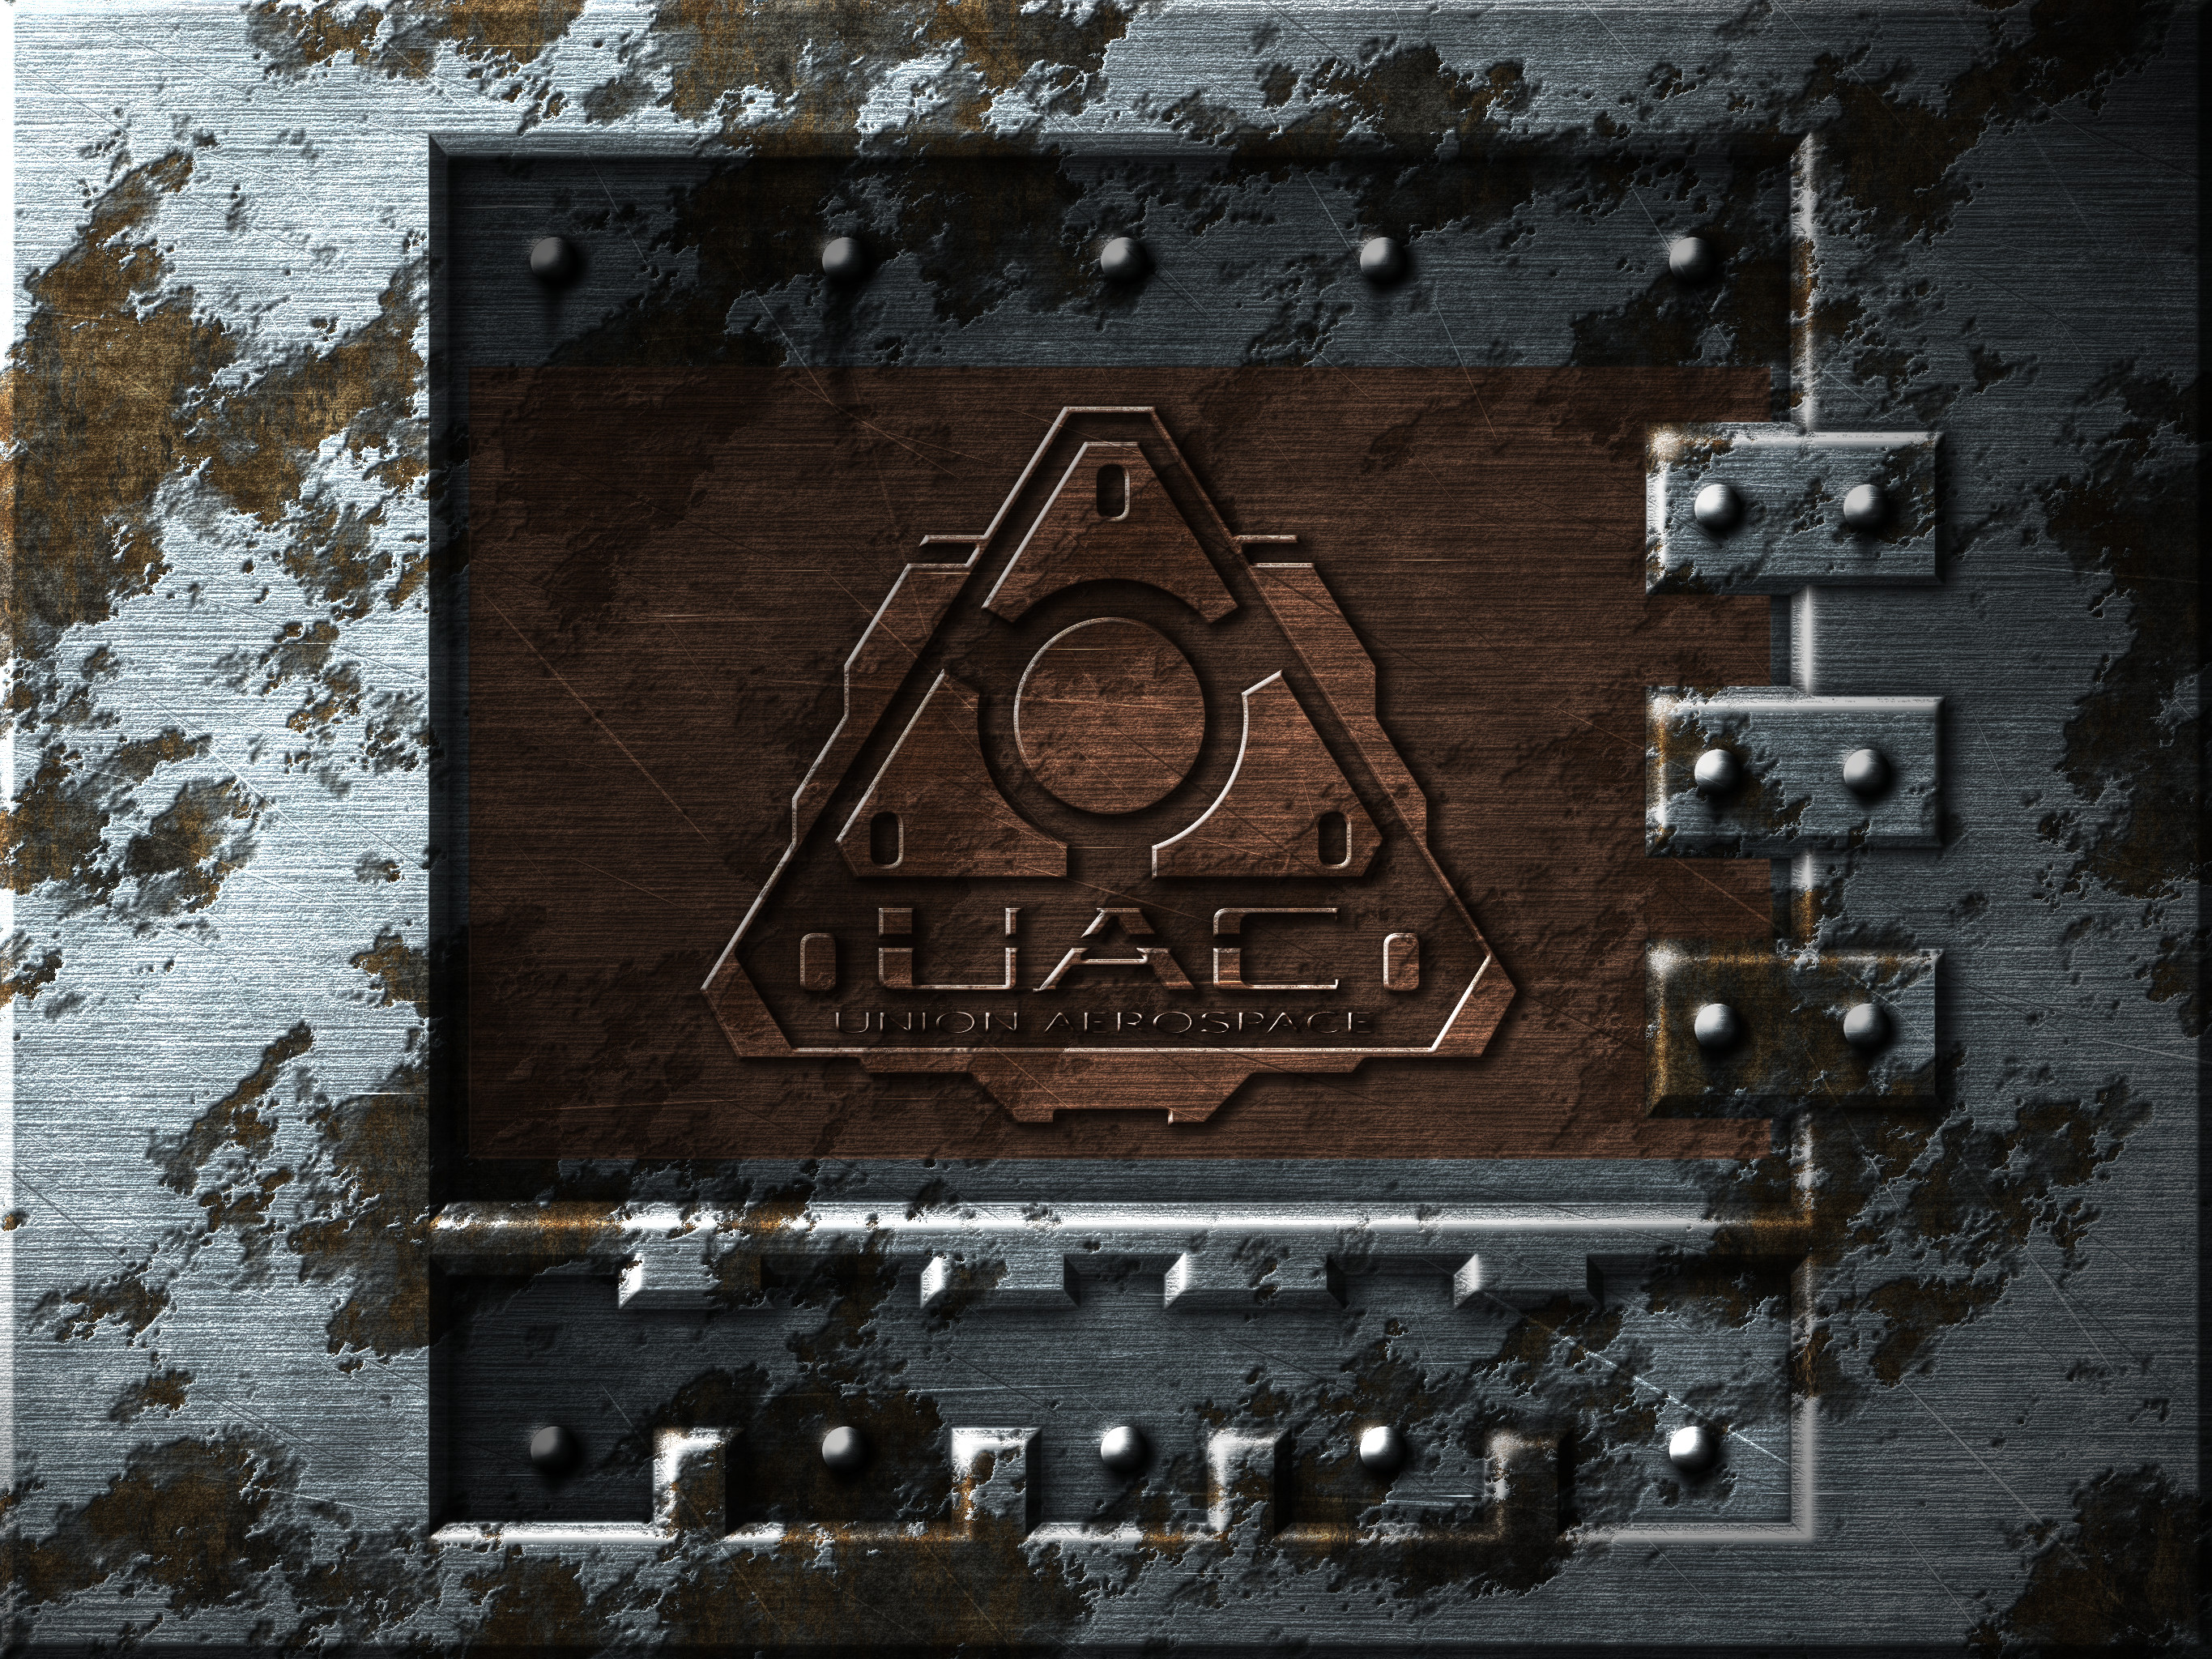 Alternate Rusted UAC door with added Depth Shading